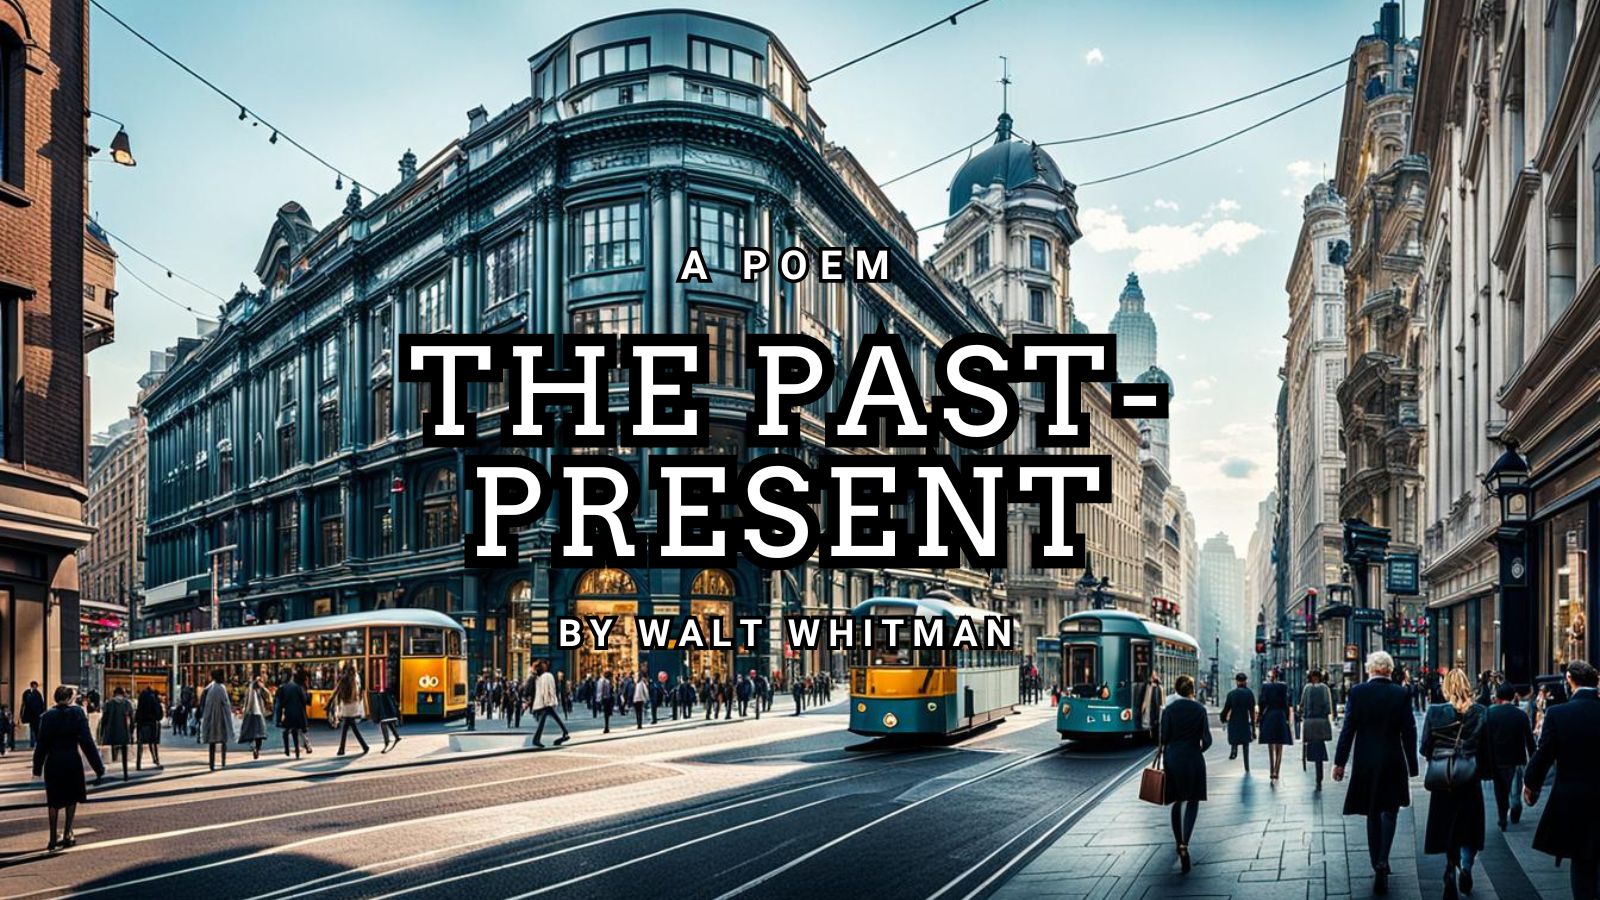 The Past-Present by Walt Whitman